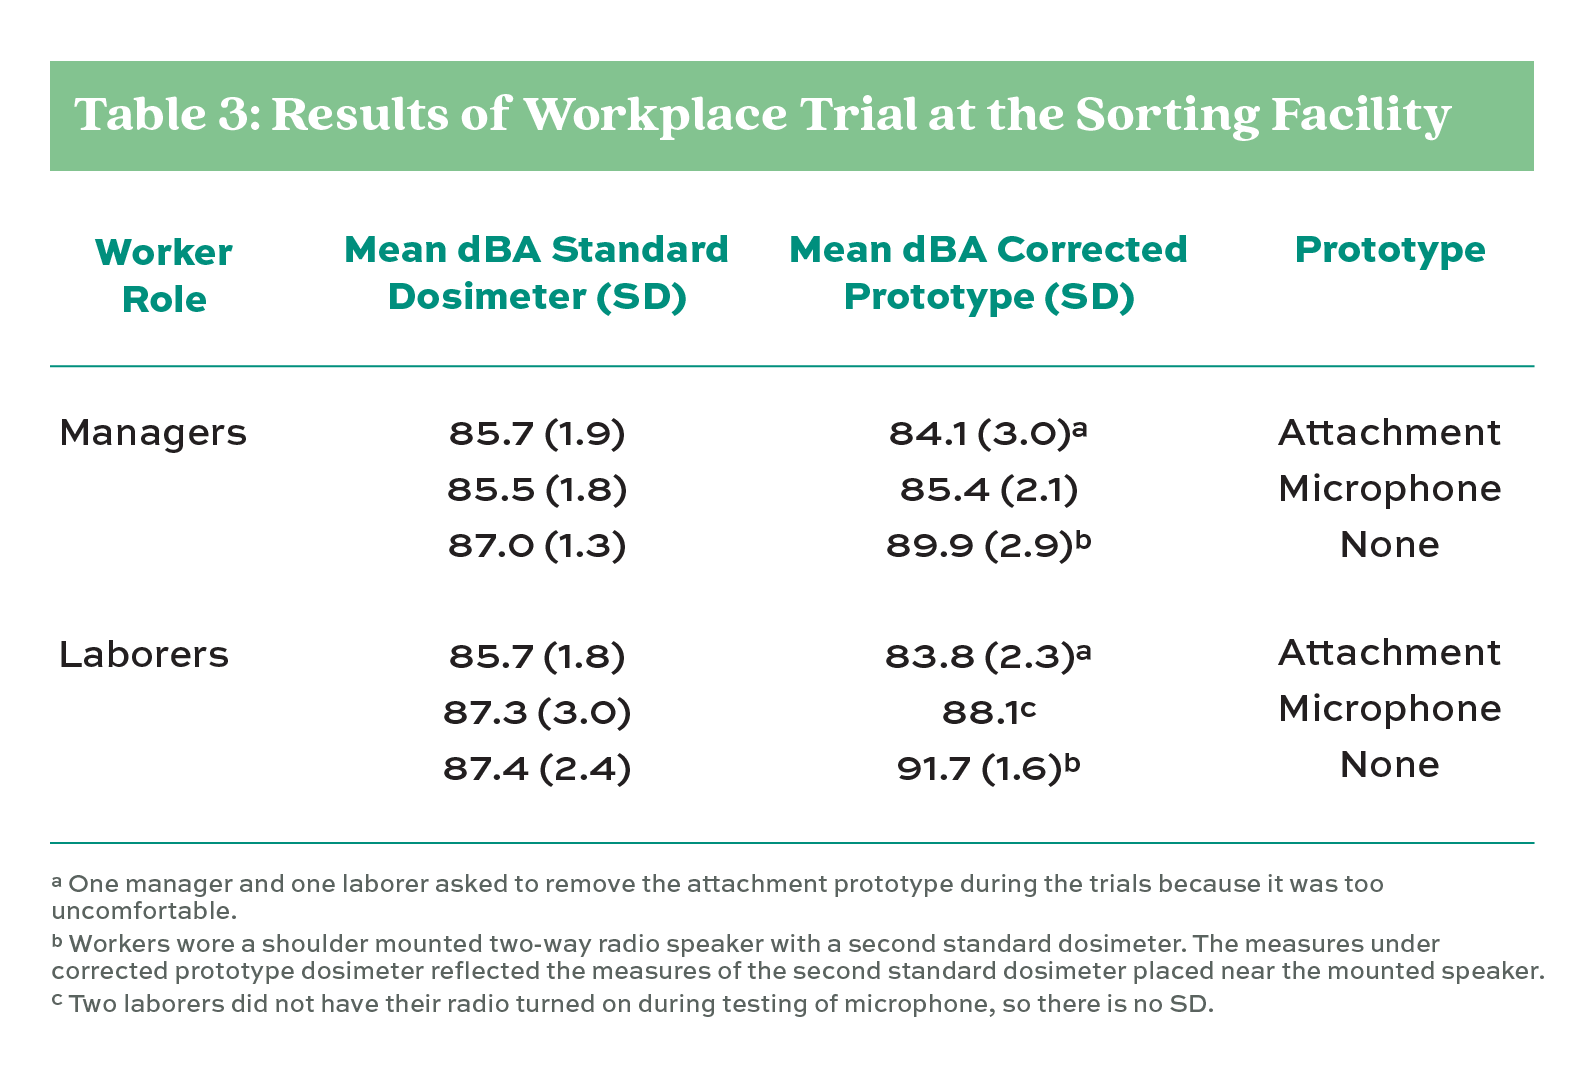 Table 3: Results of Workplace Trial at the Sorting Facility